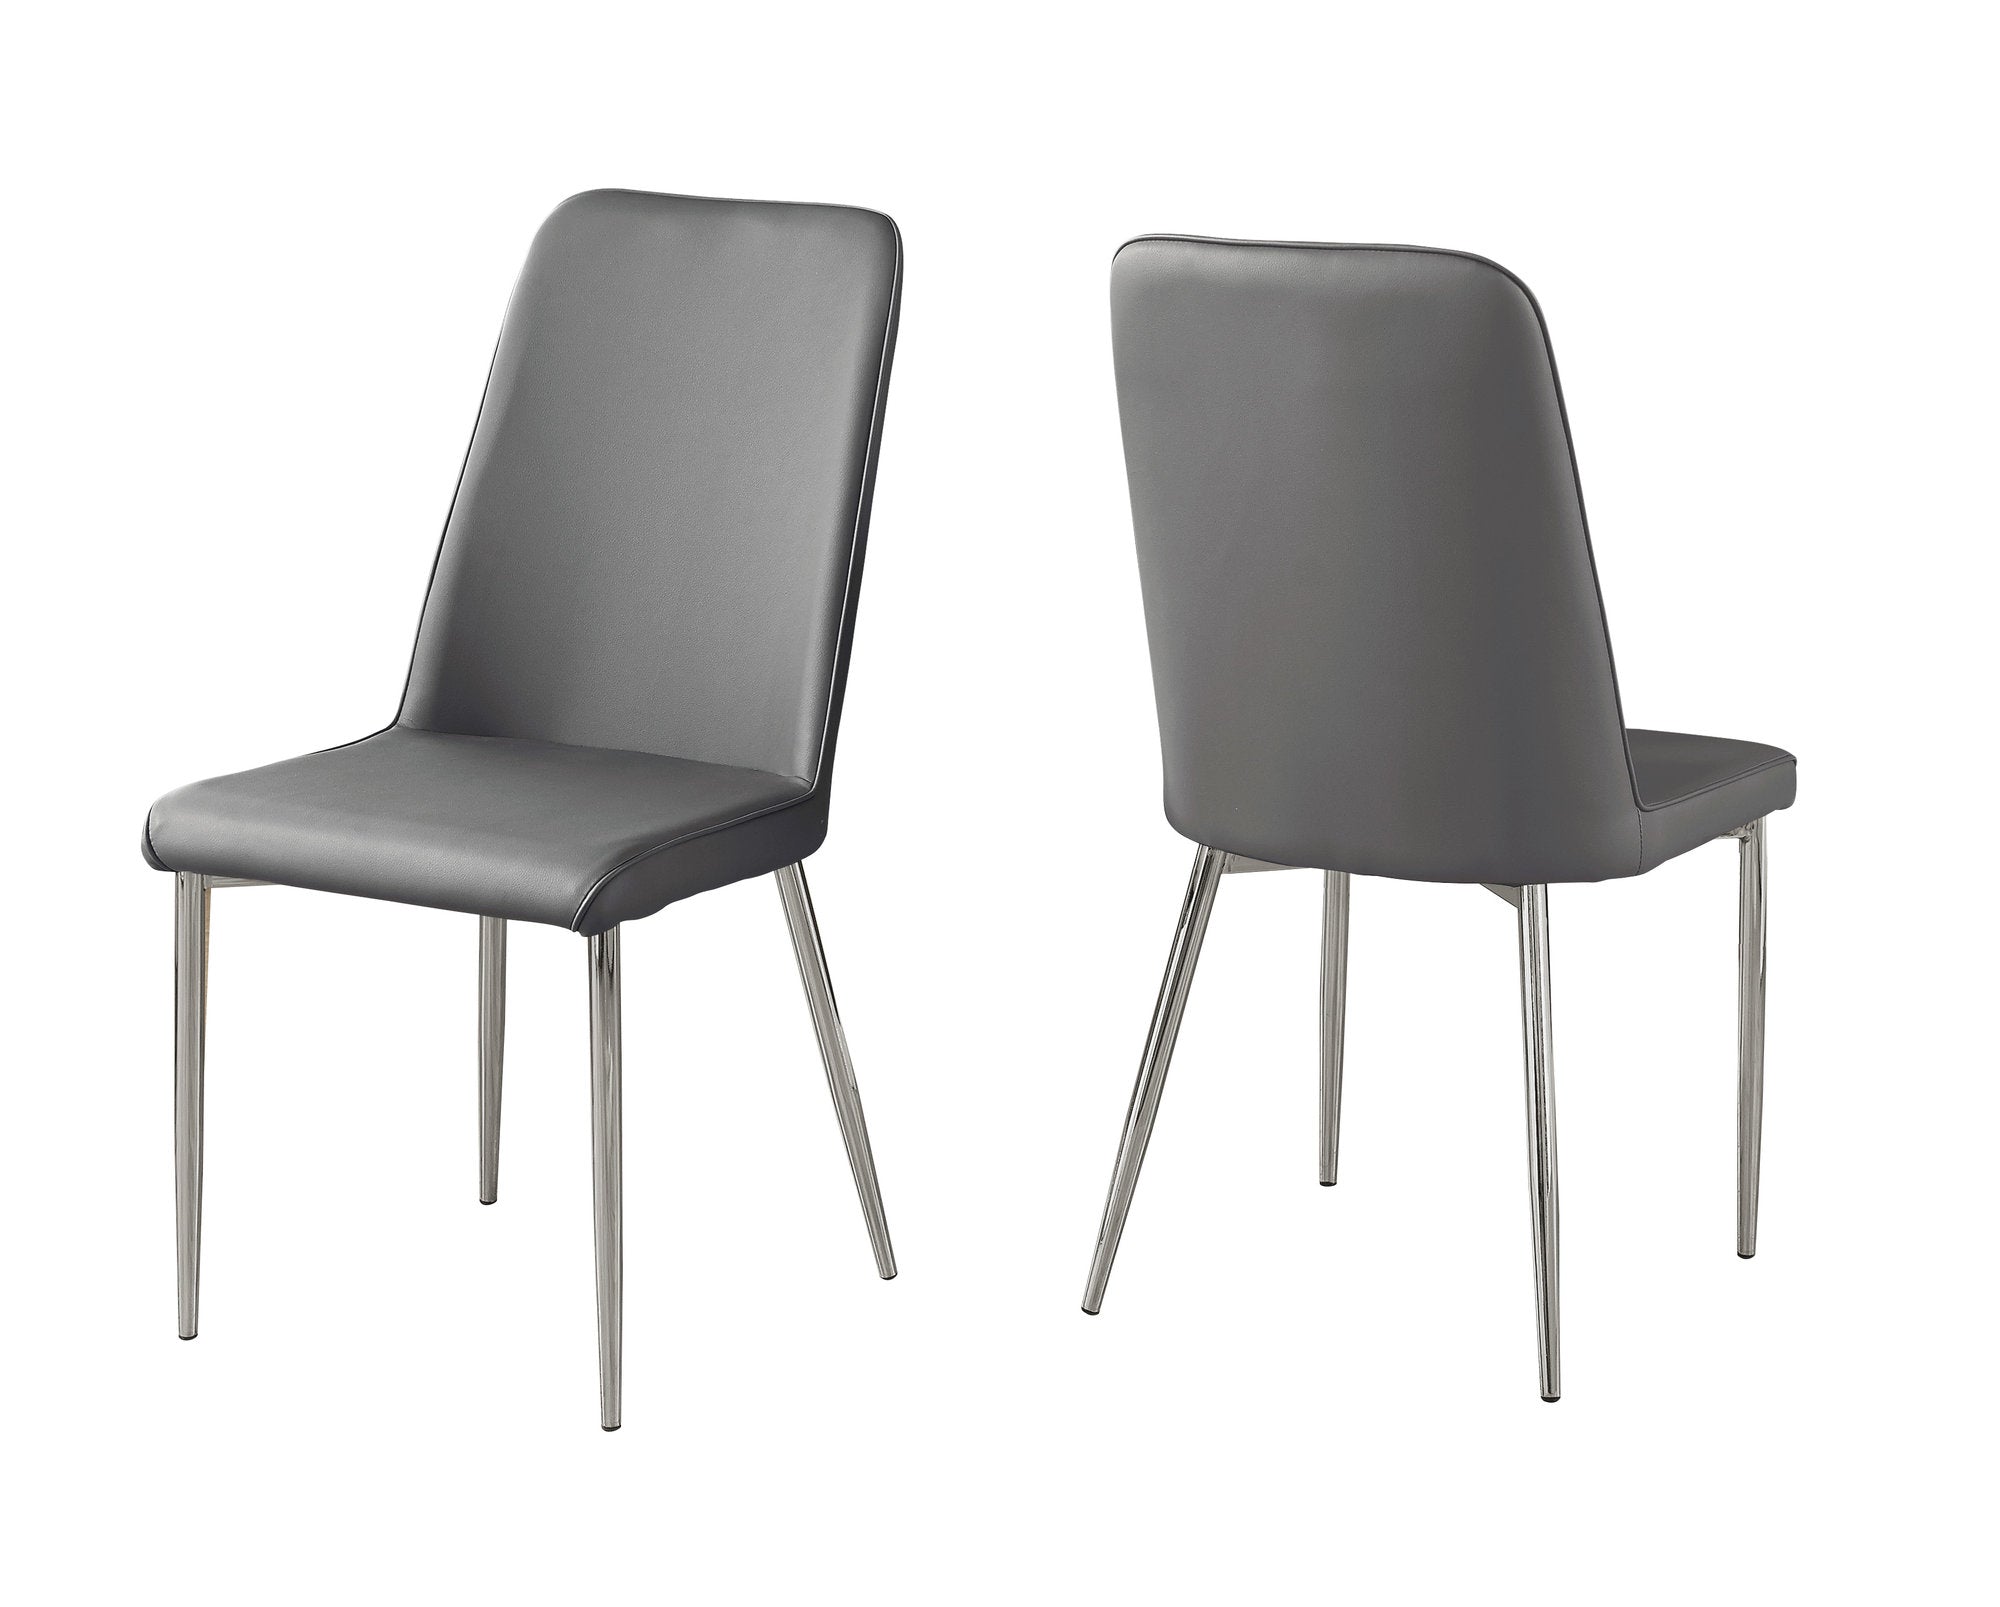 MN-201035    Dining Chair, Set Of 2, Side, Pu Leather-Look, Upholstered, Metal Legs, Kitchen, Dining Room, Leather Look, Metal Legs, Grey, Chrome, Contemporary, Modern